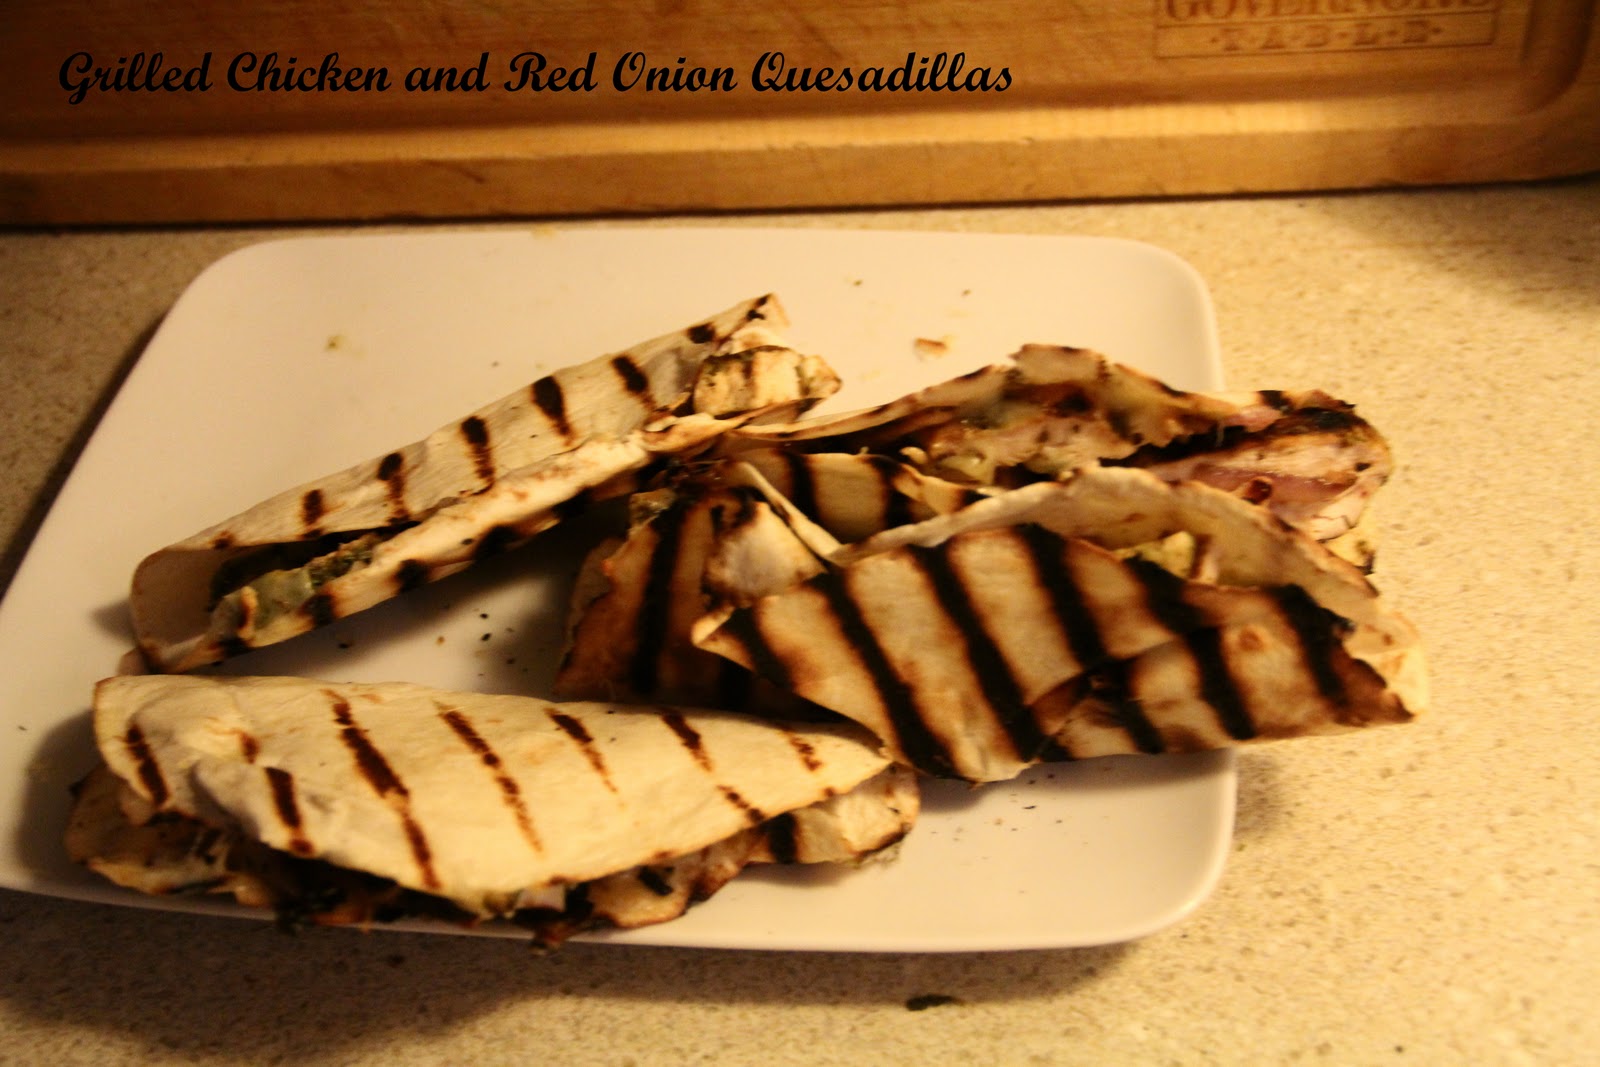 Real Grilling with Patrick: Grilled Chicken and Red Onion Quesadillas